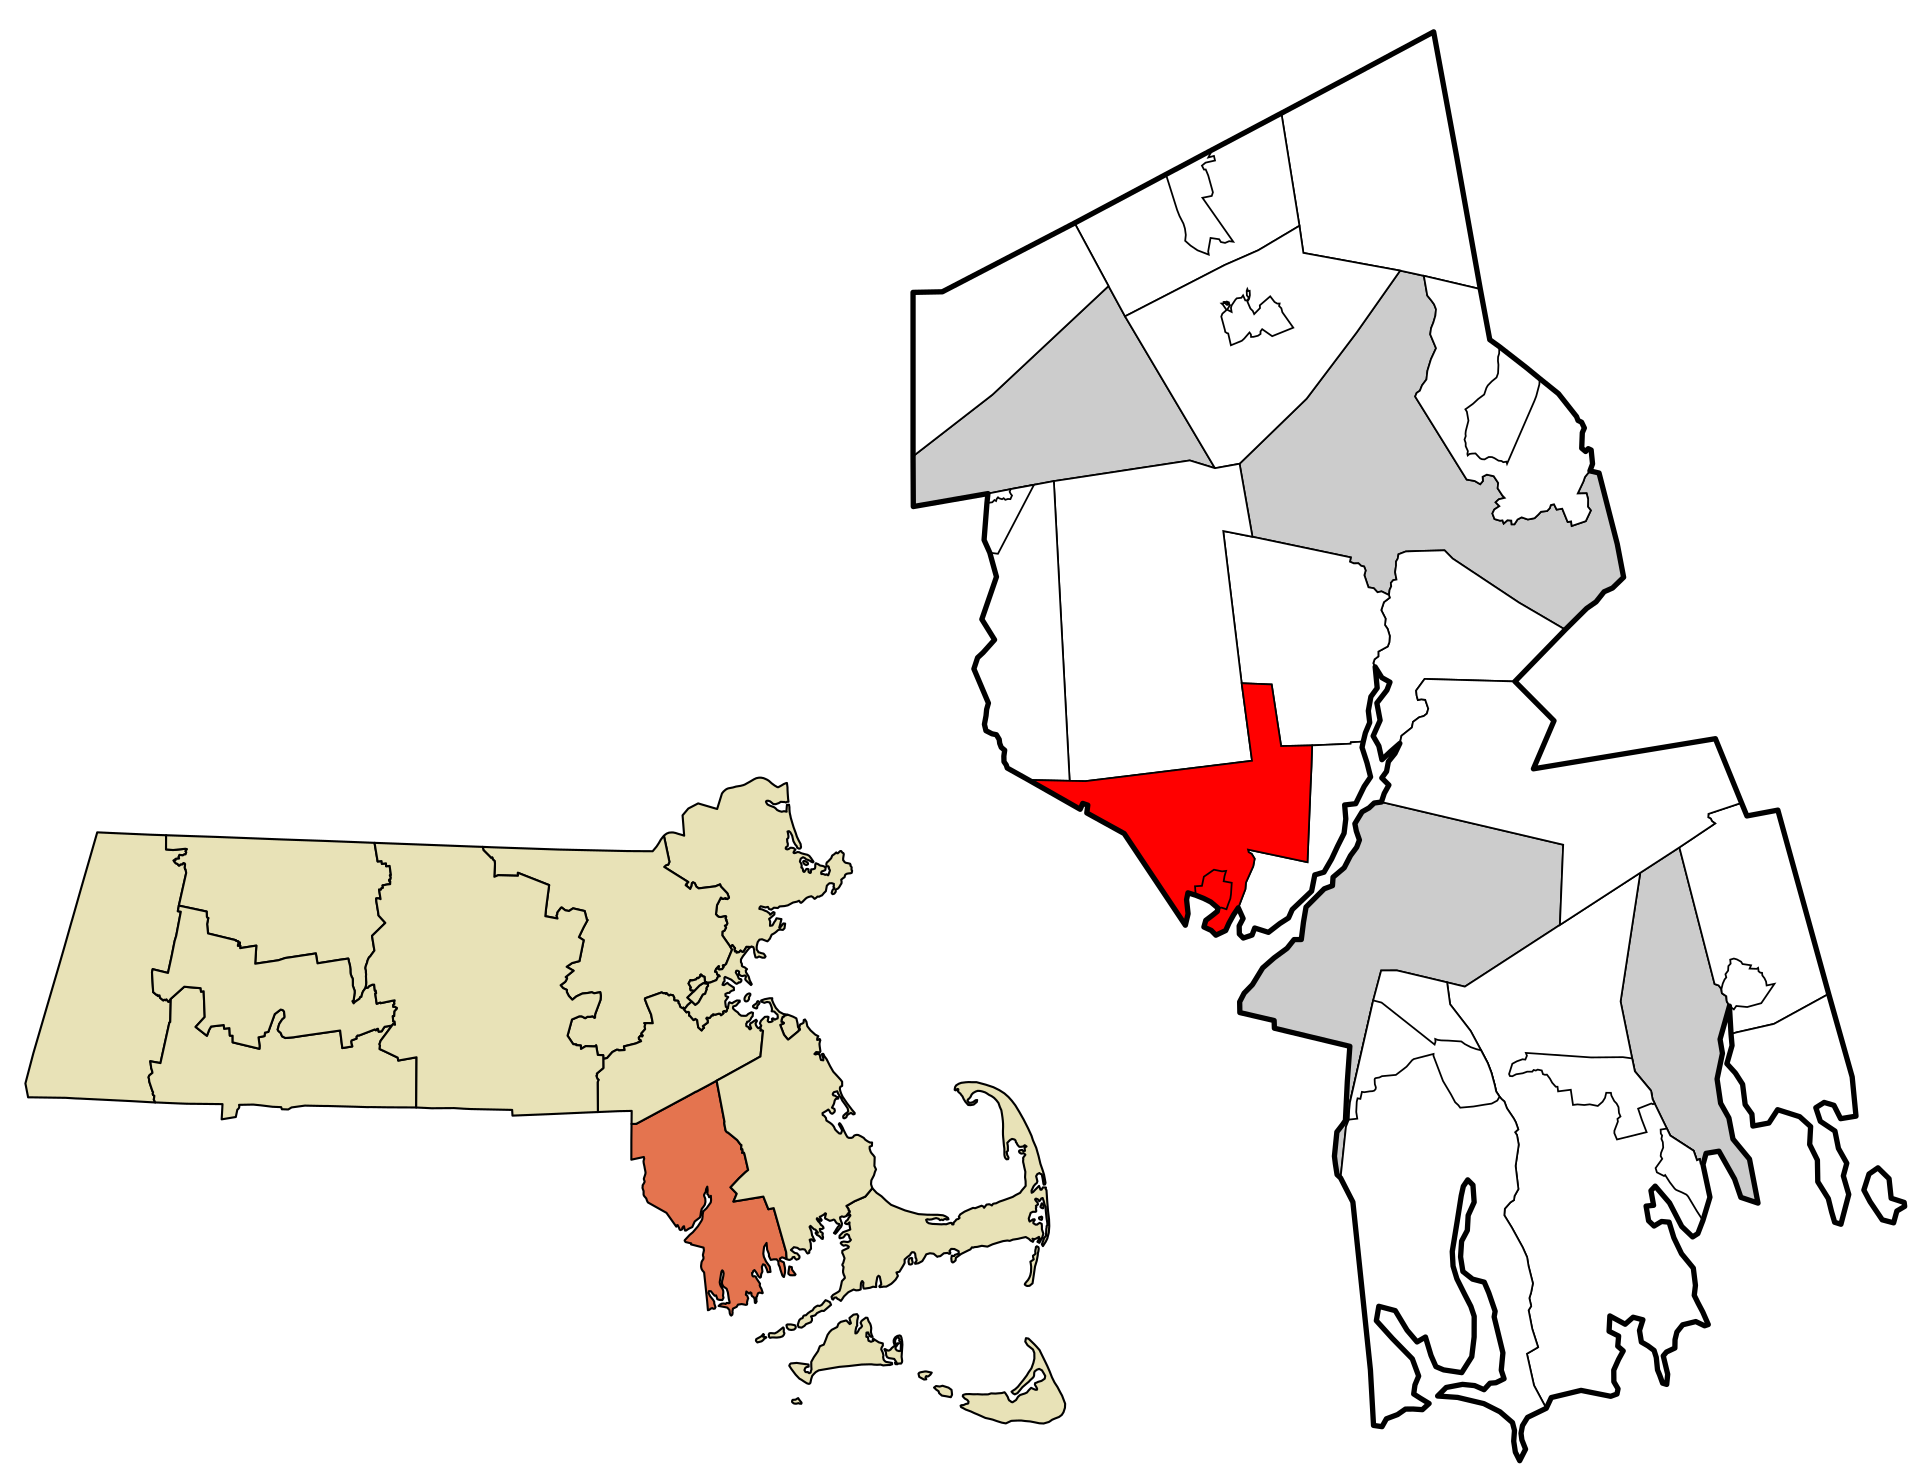 Swansea-Bristol_County_Massachusetts_incorporated_and_unincorporated_areas_Swansea_highlighted.svg